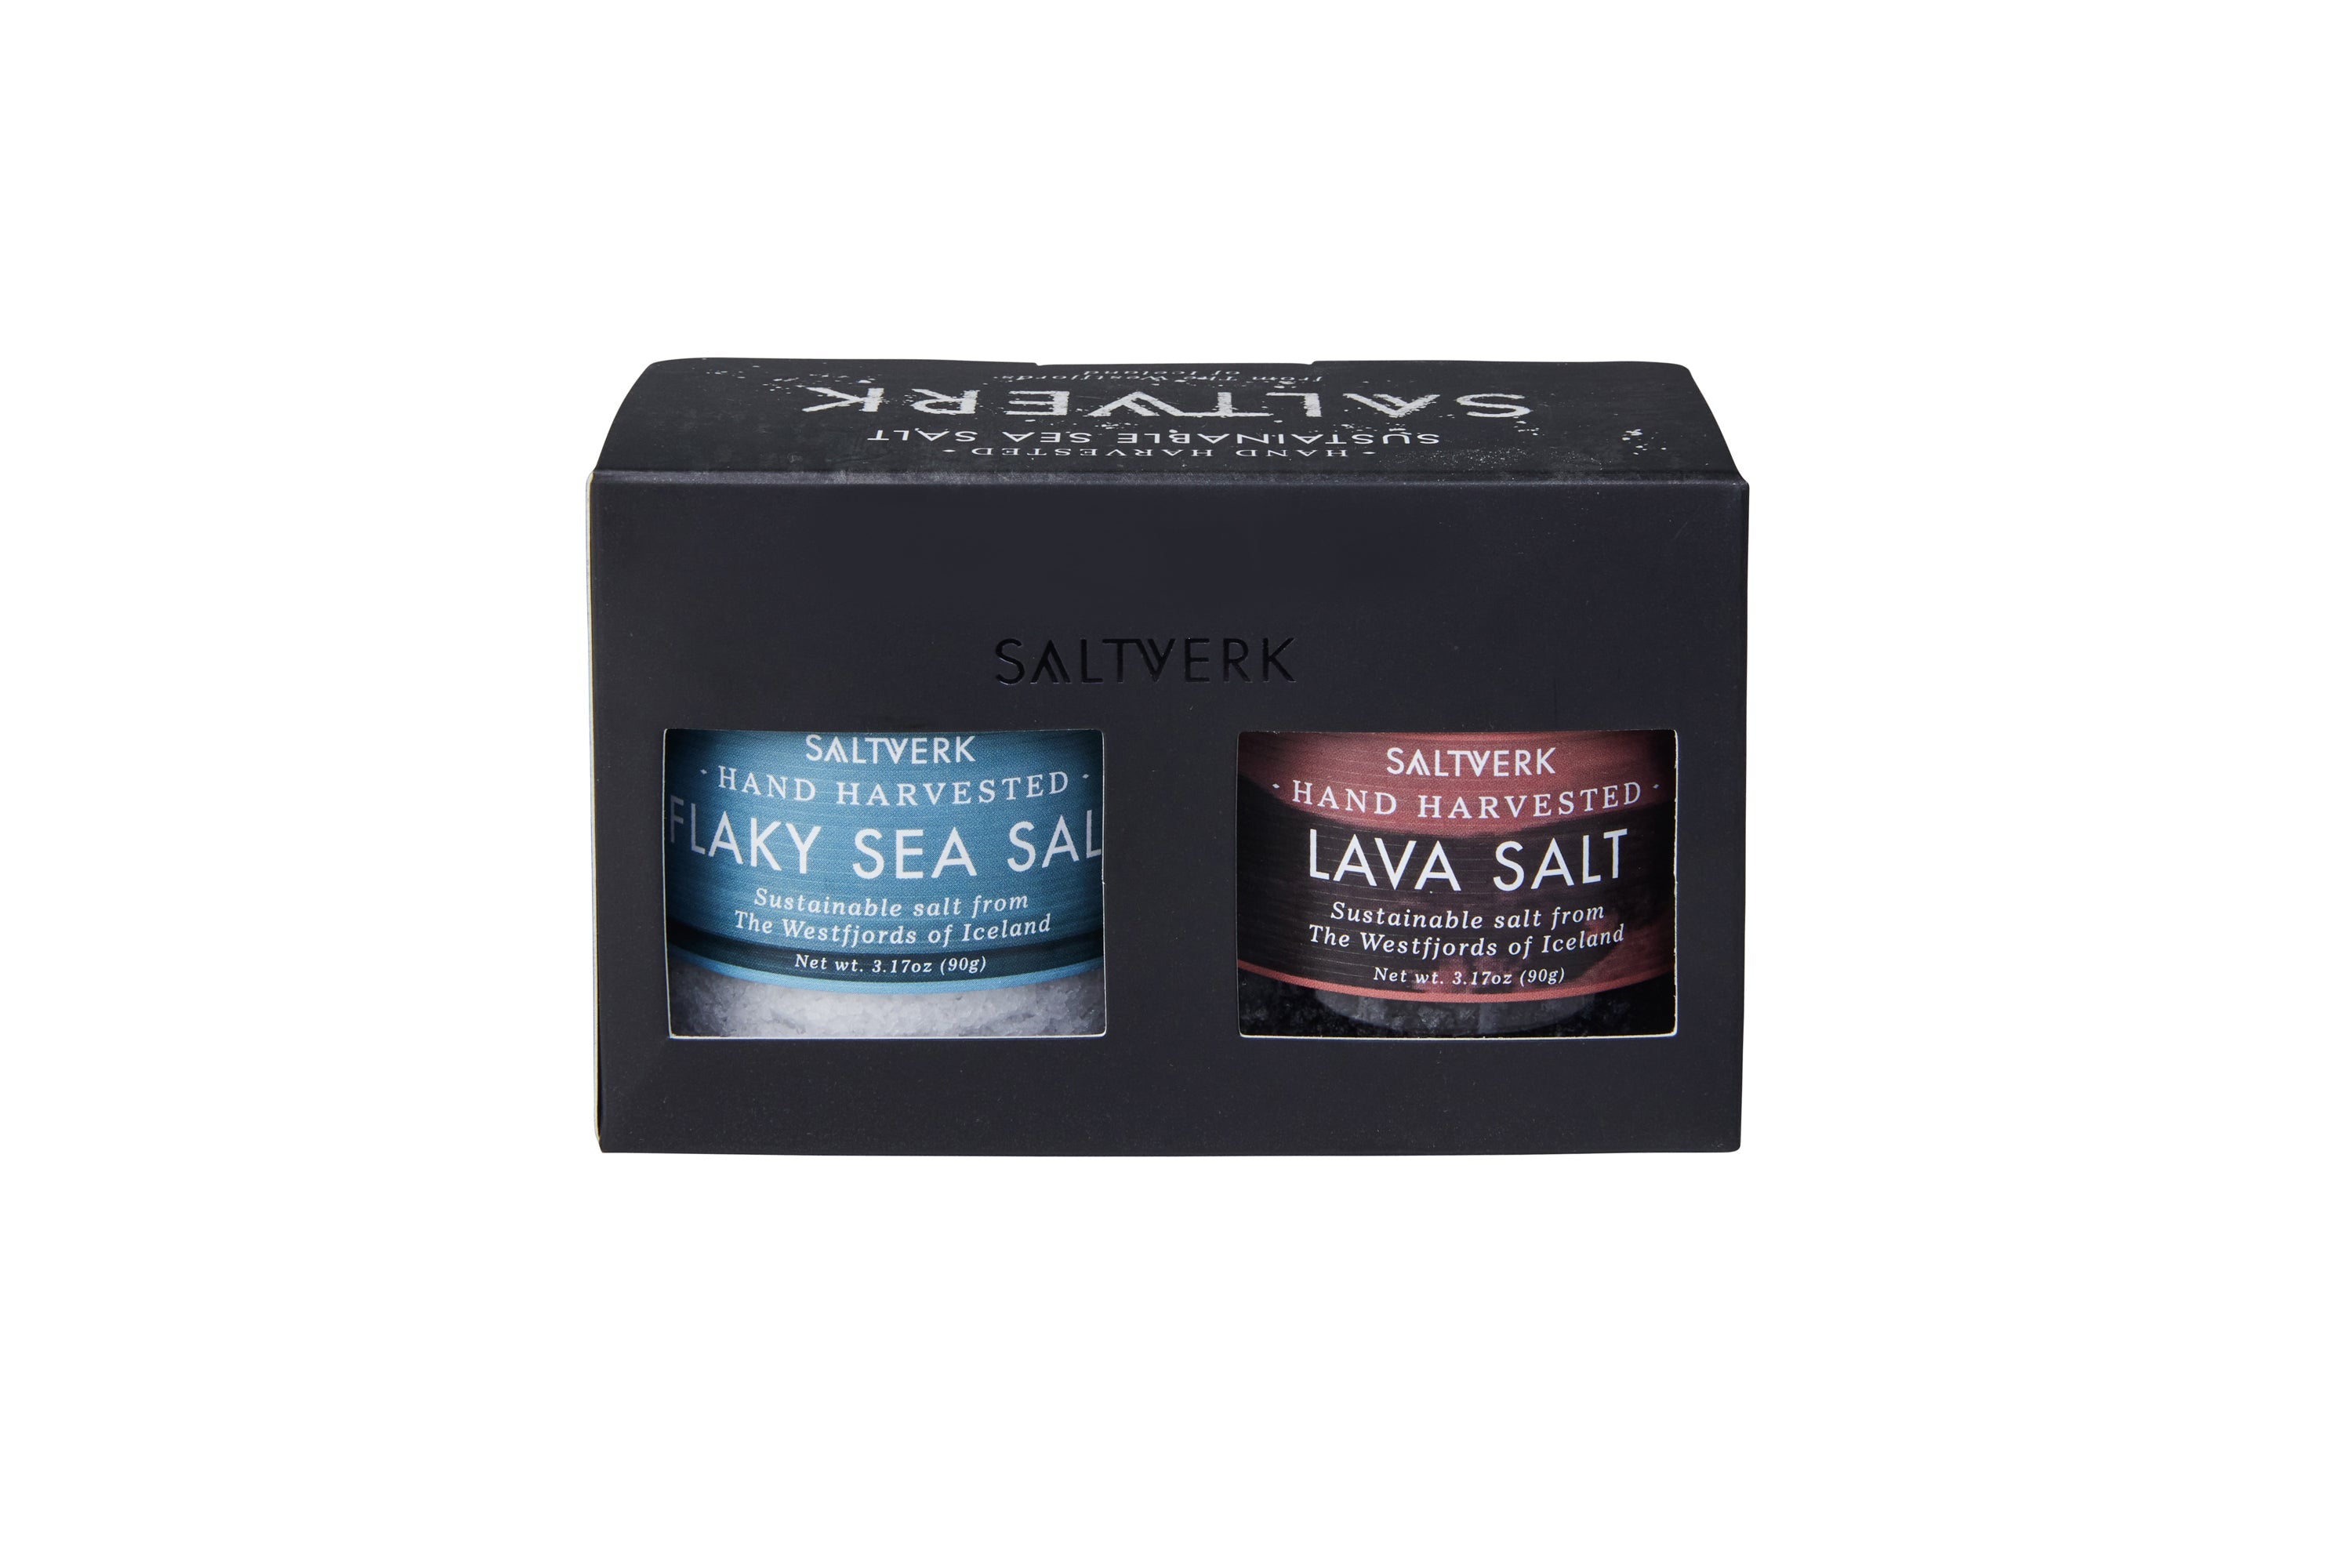 Pure & Lava Salt Gift Box - Icelandic gourmet delight. Pure, bold & striking Lava salt. Stunning gift for foodies. Sustainable indulgence. Shop now & share the magic!